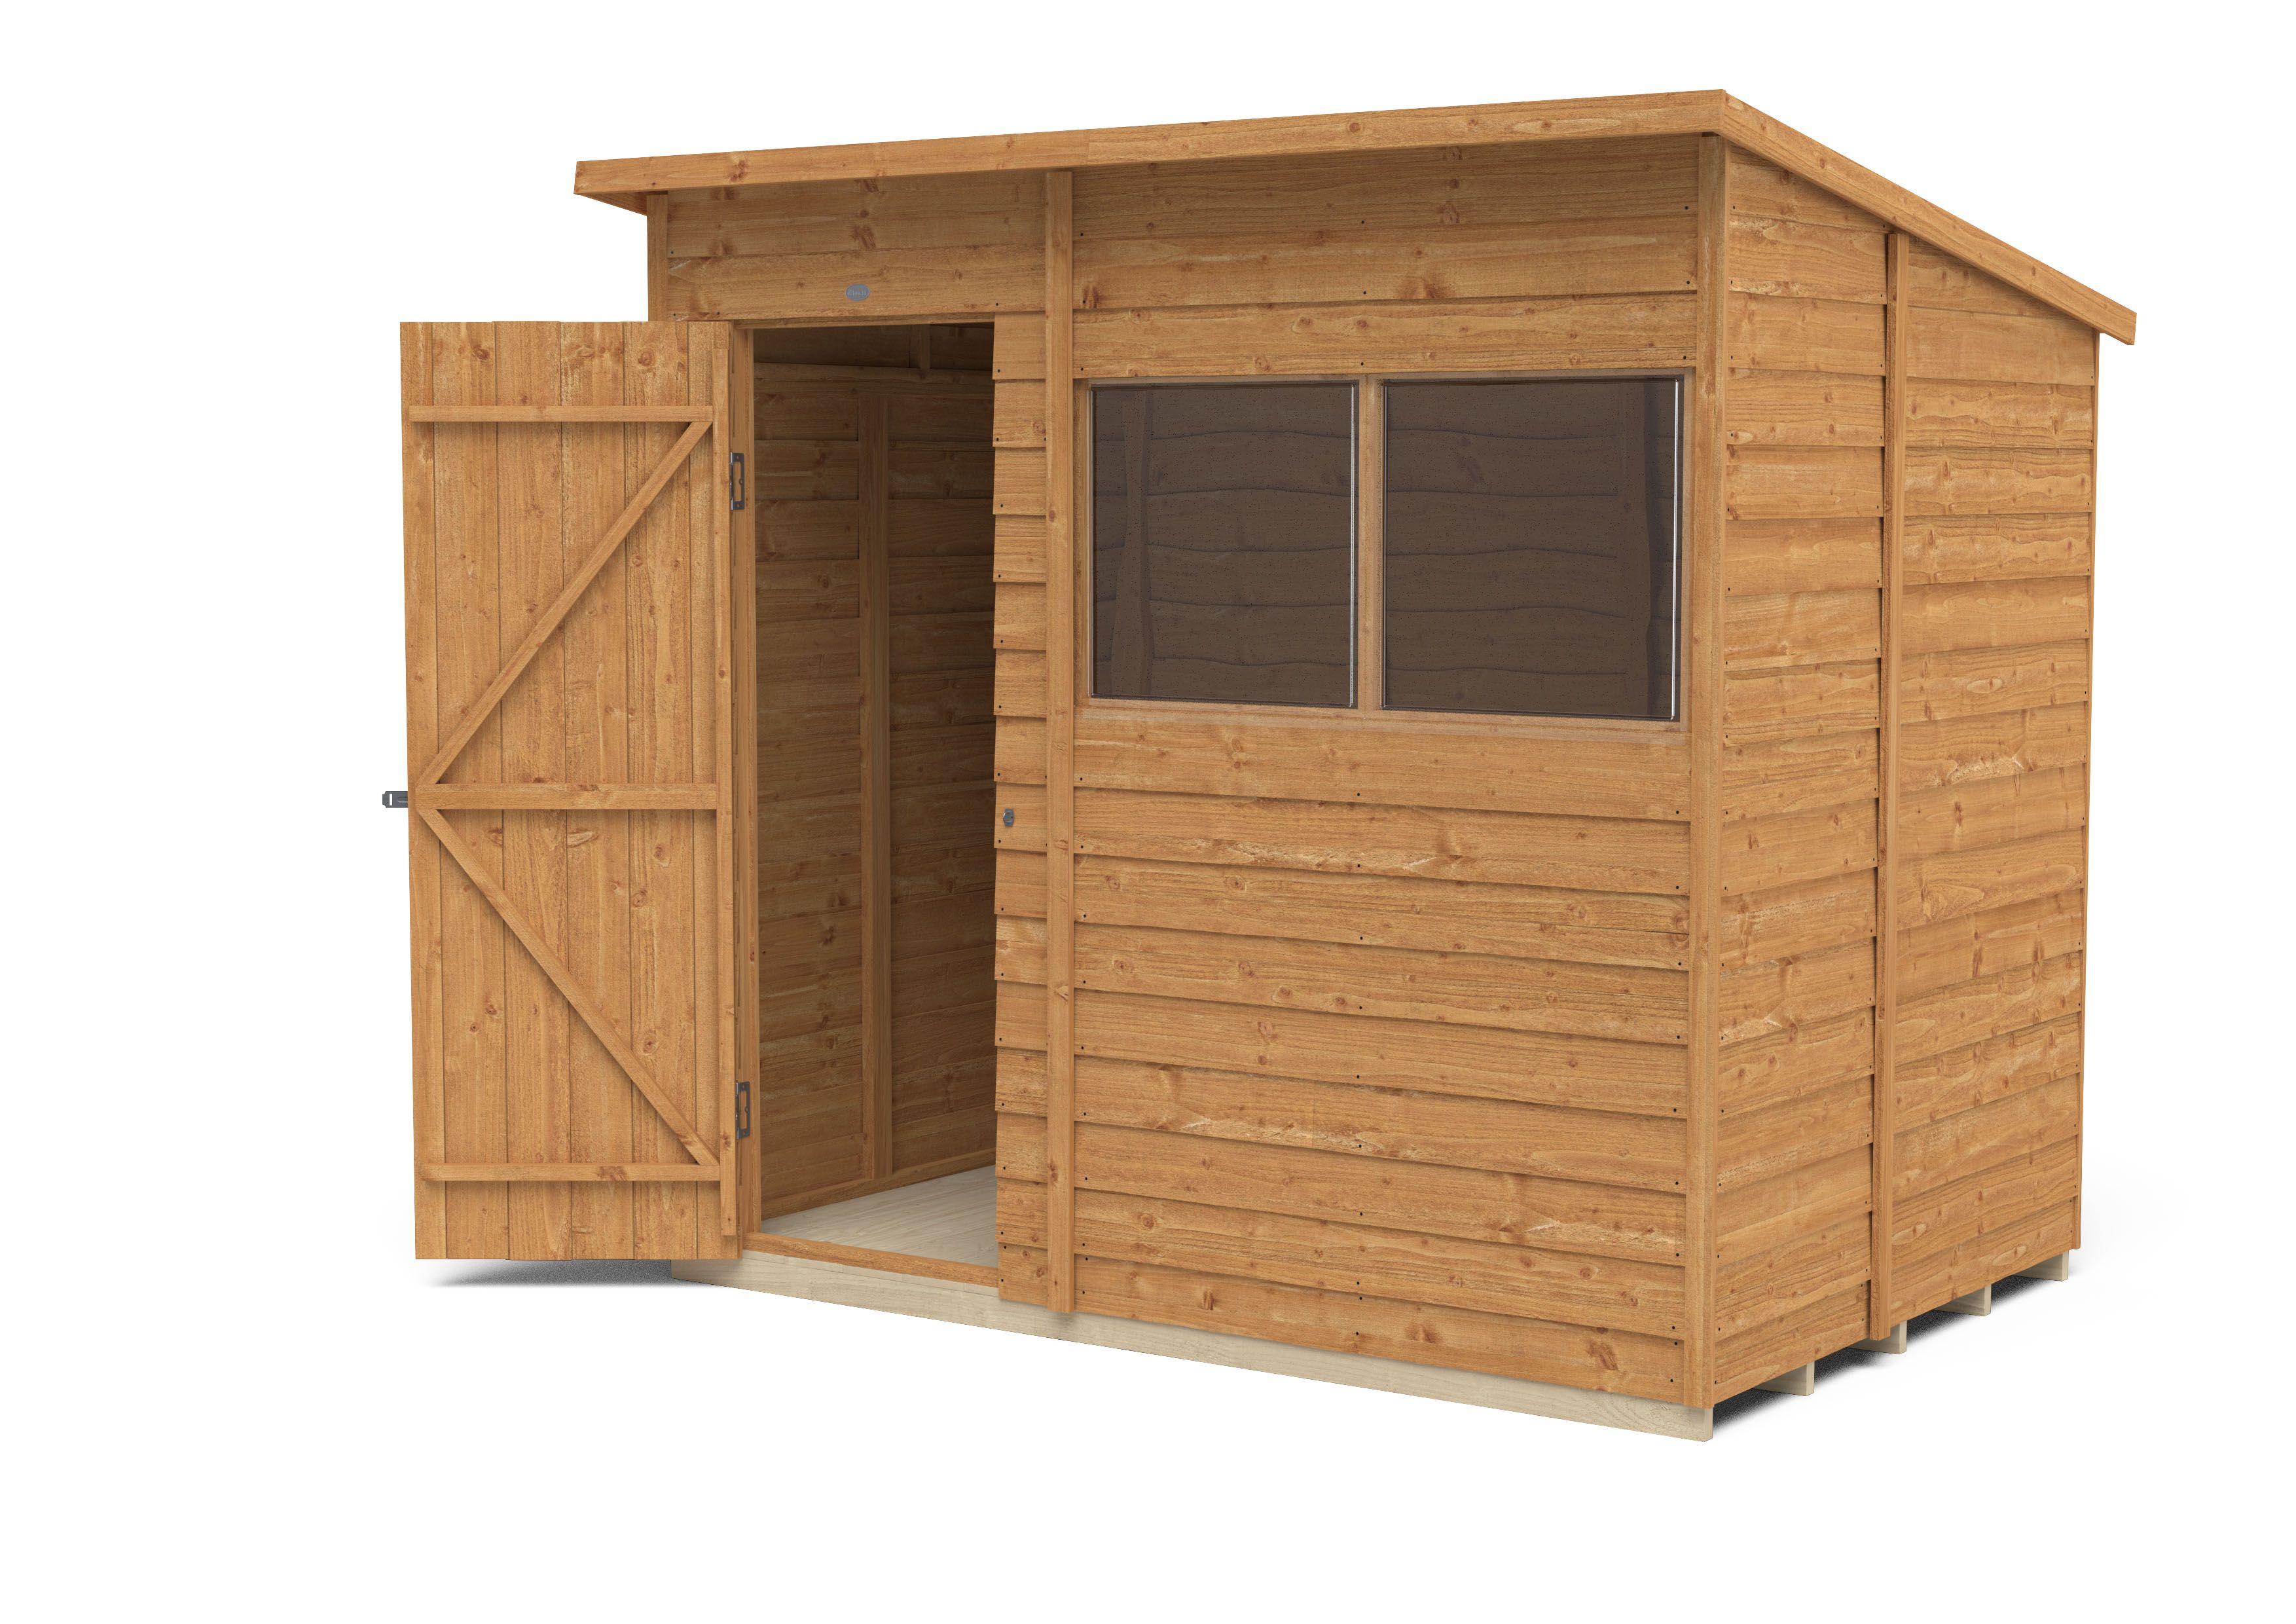 Forest Garden Overlap 7x5 ft Pent Wooden Dip treated Shed with floor & 2 windows - Assembly service included